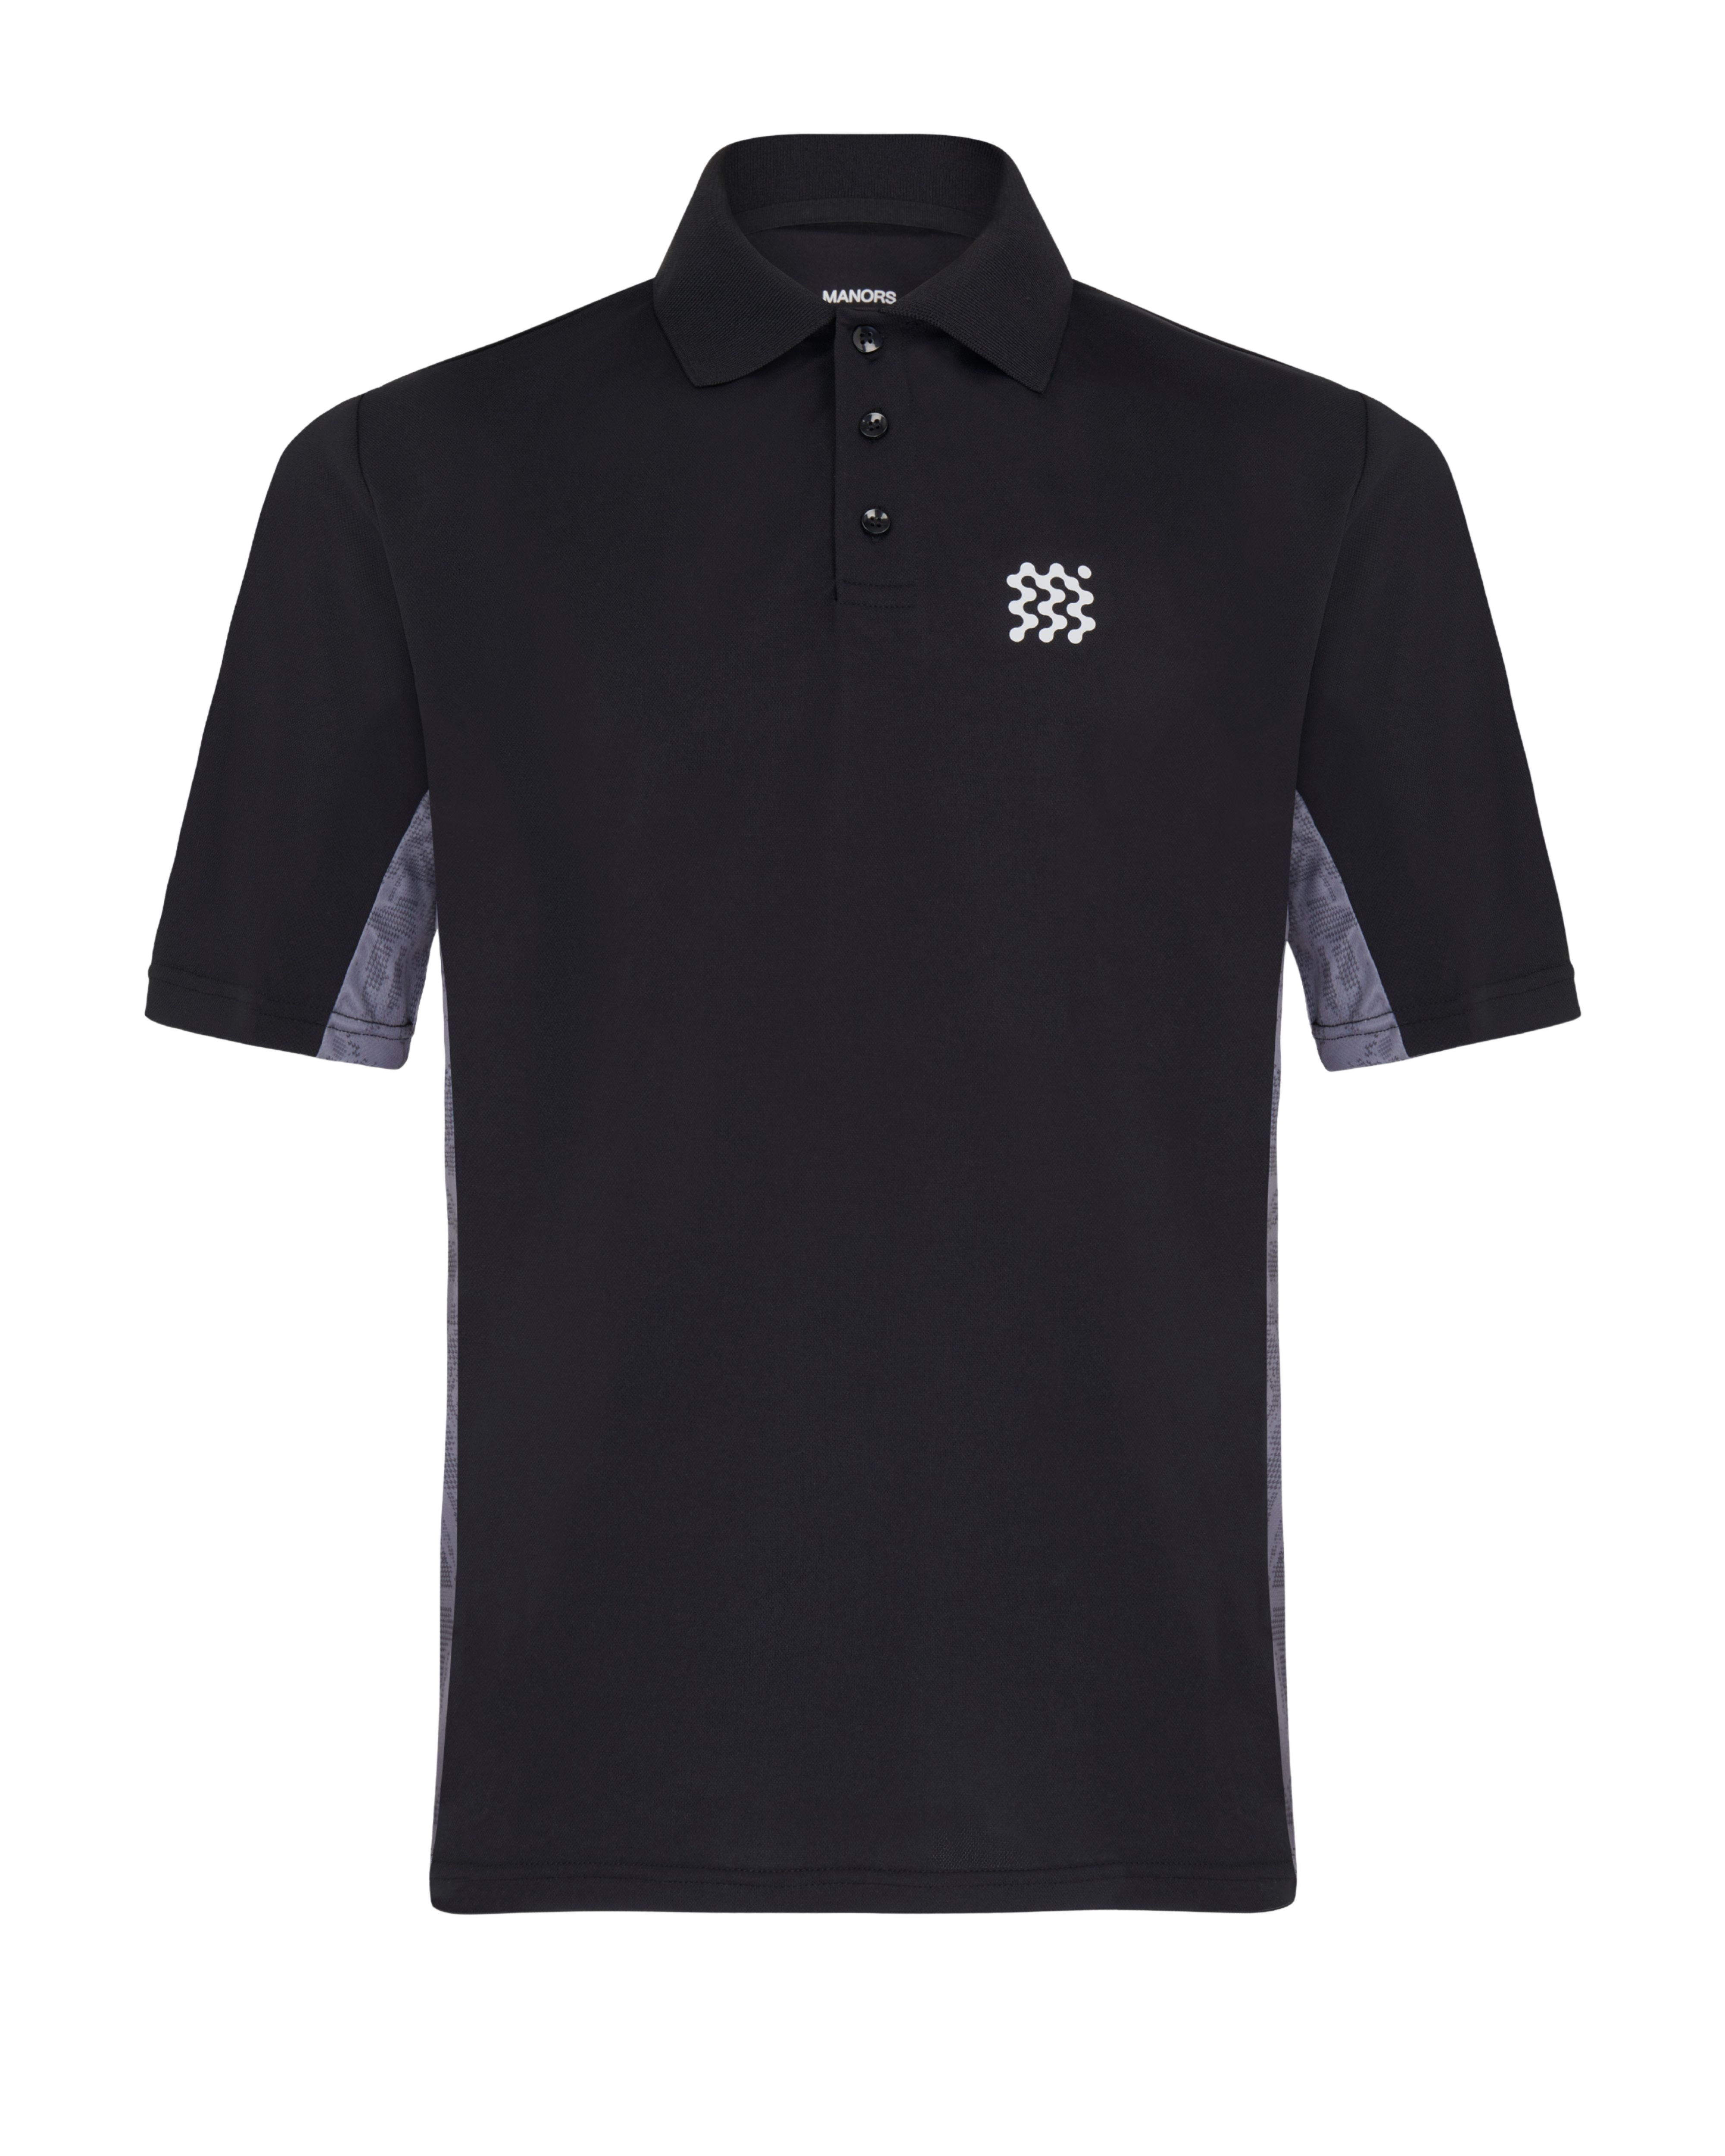 MANORS Men's The Course Polo | golf and sports fashion brands at agorabkk 